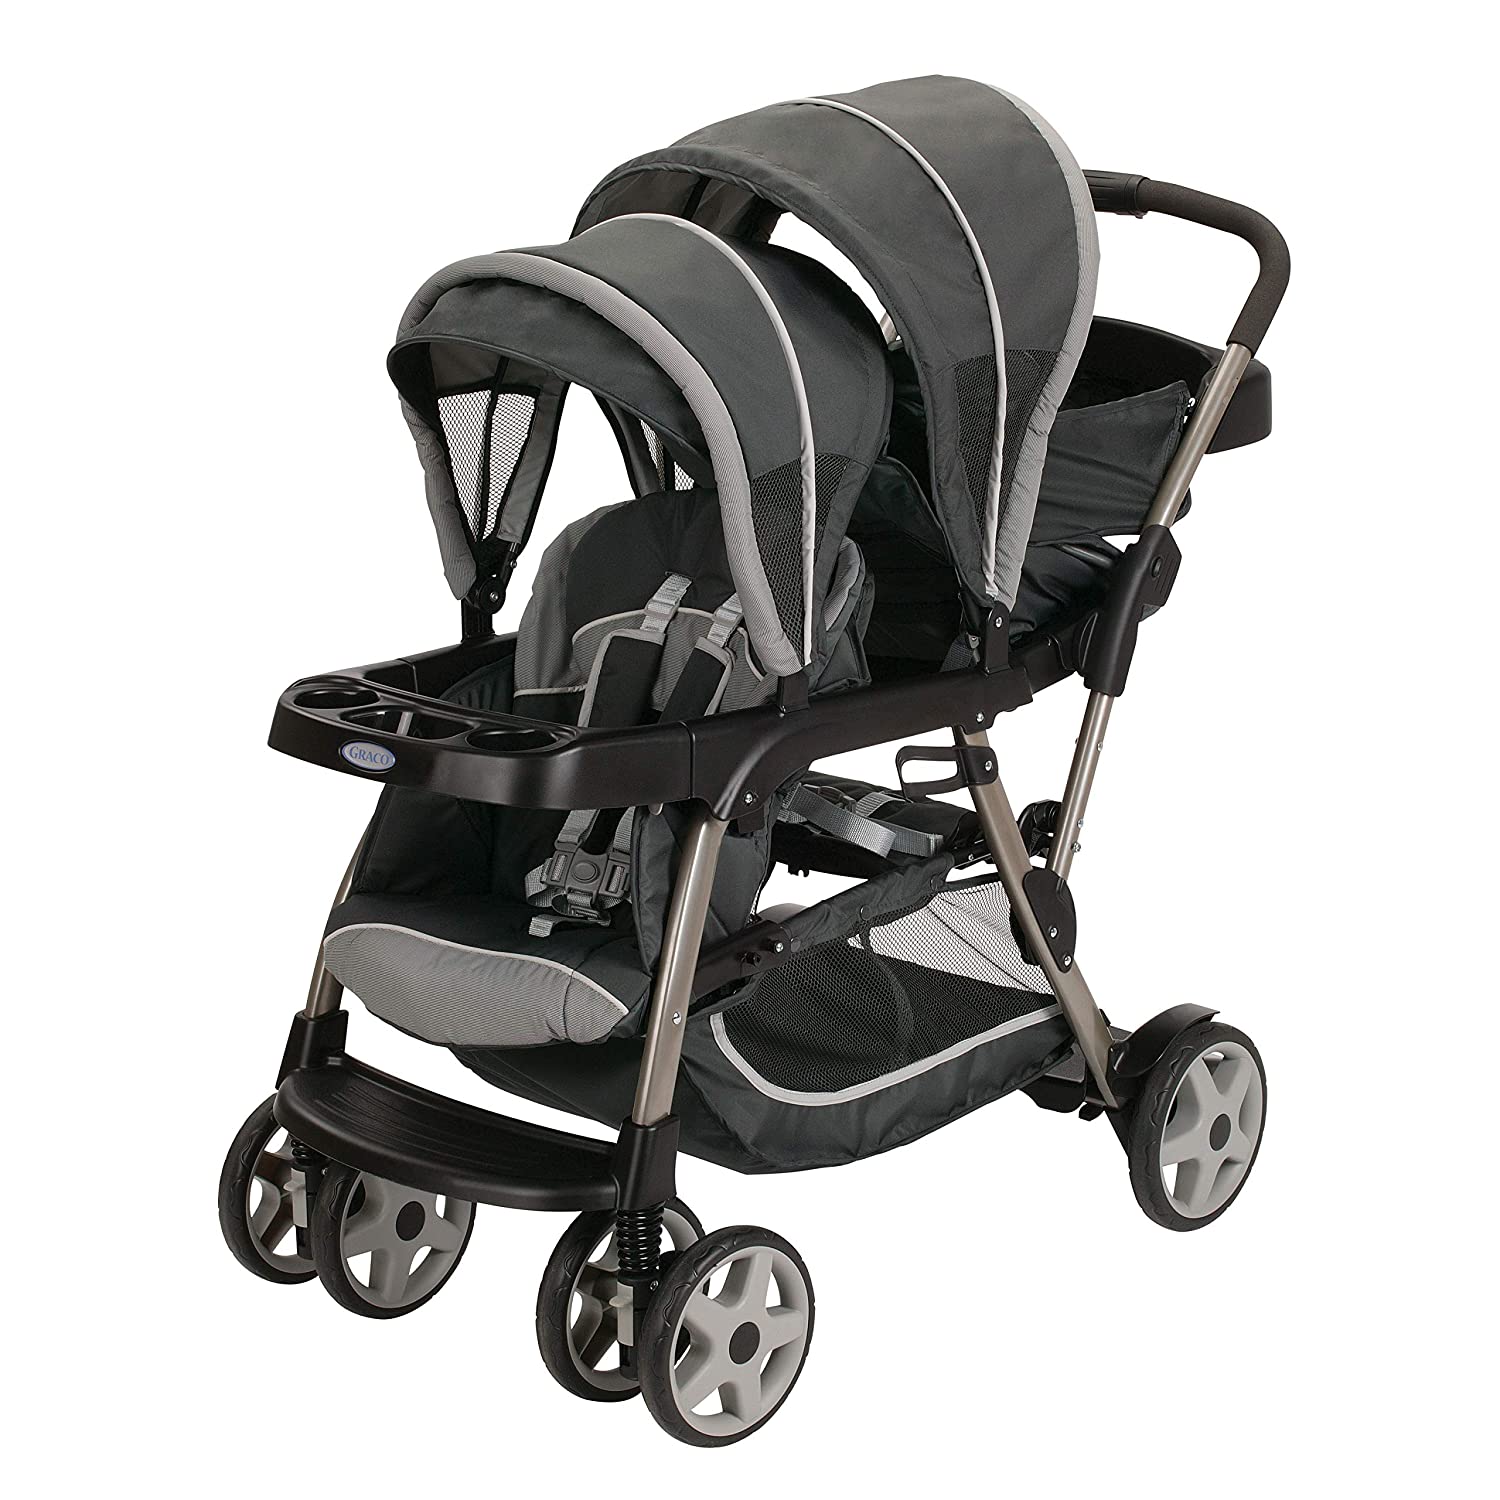 Graco Ready2Grow Click Connect LX Double Baby Glacier Stroller